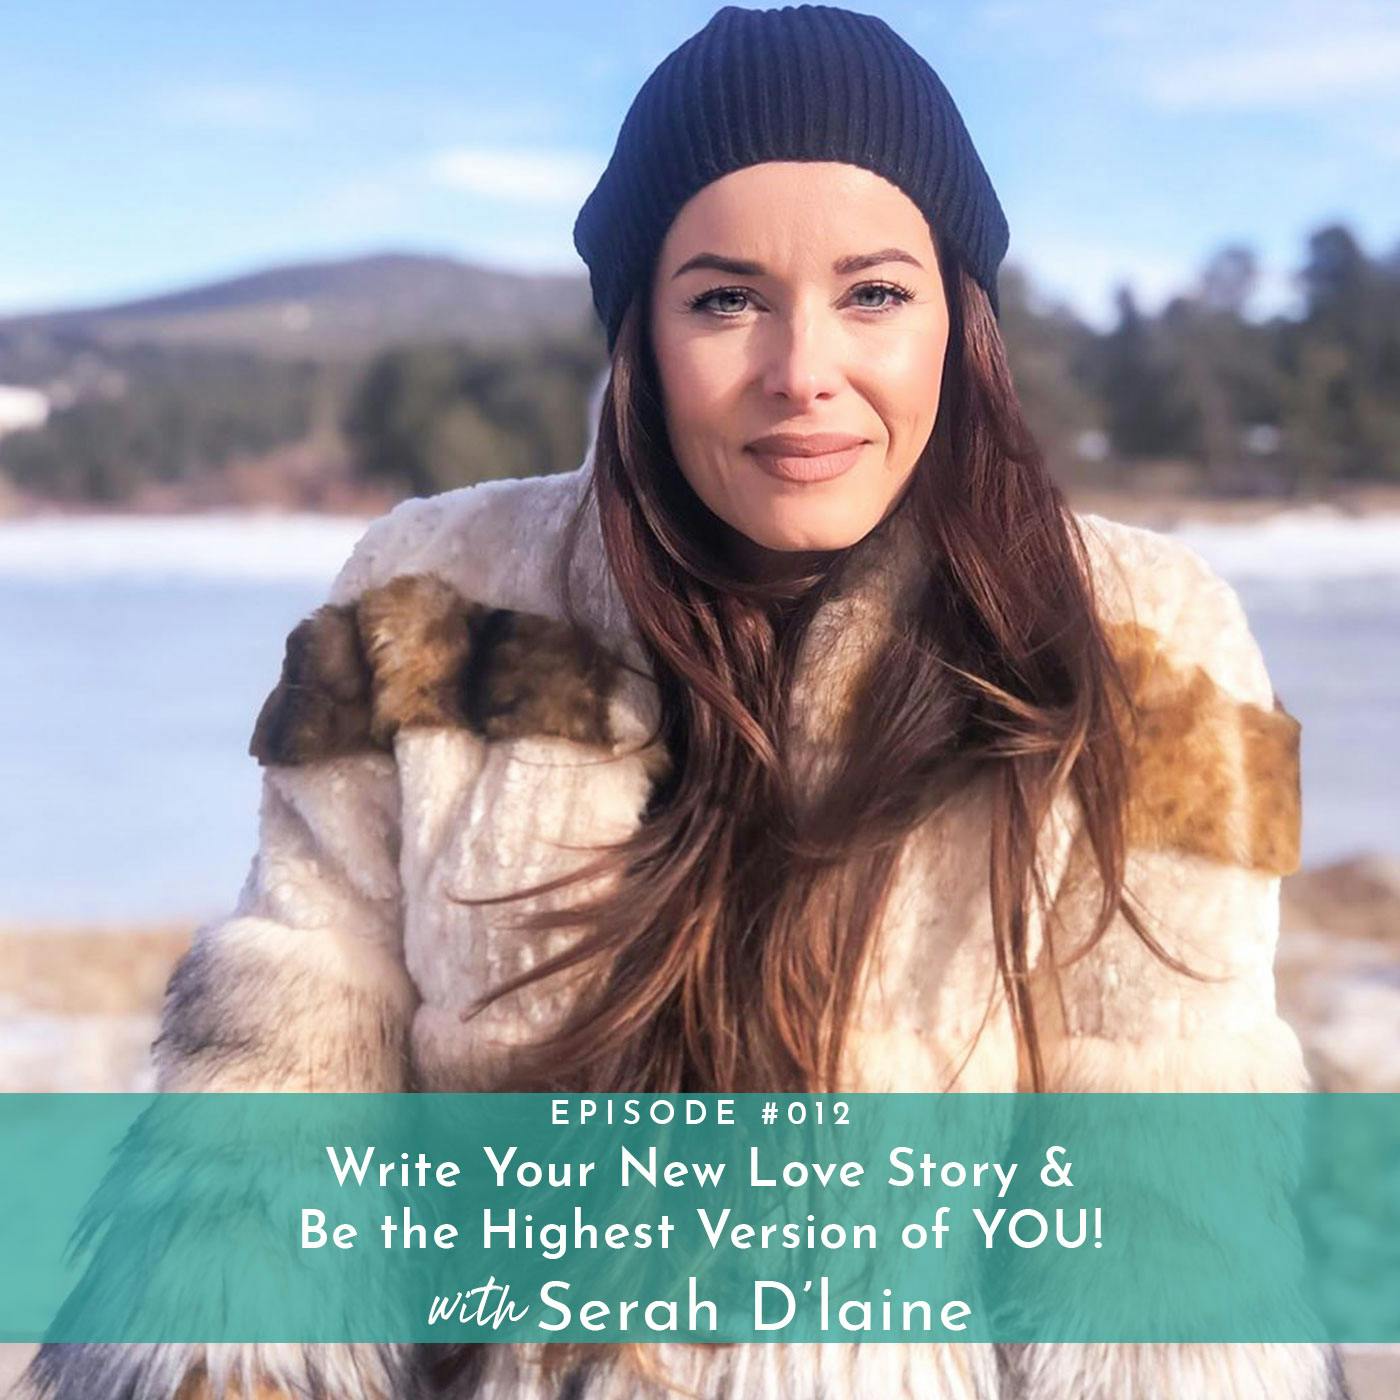 Write Your New Love Story & Be the Highest Version of YOU! with Serah D’laine